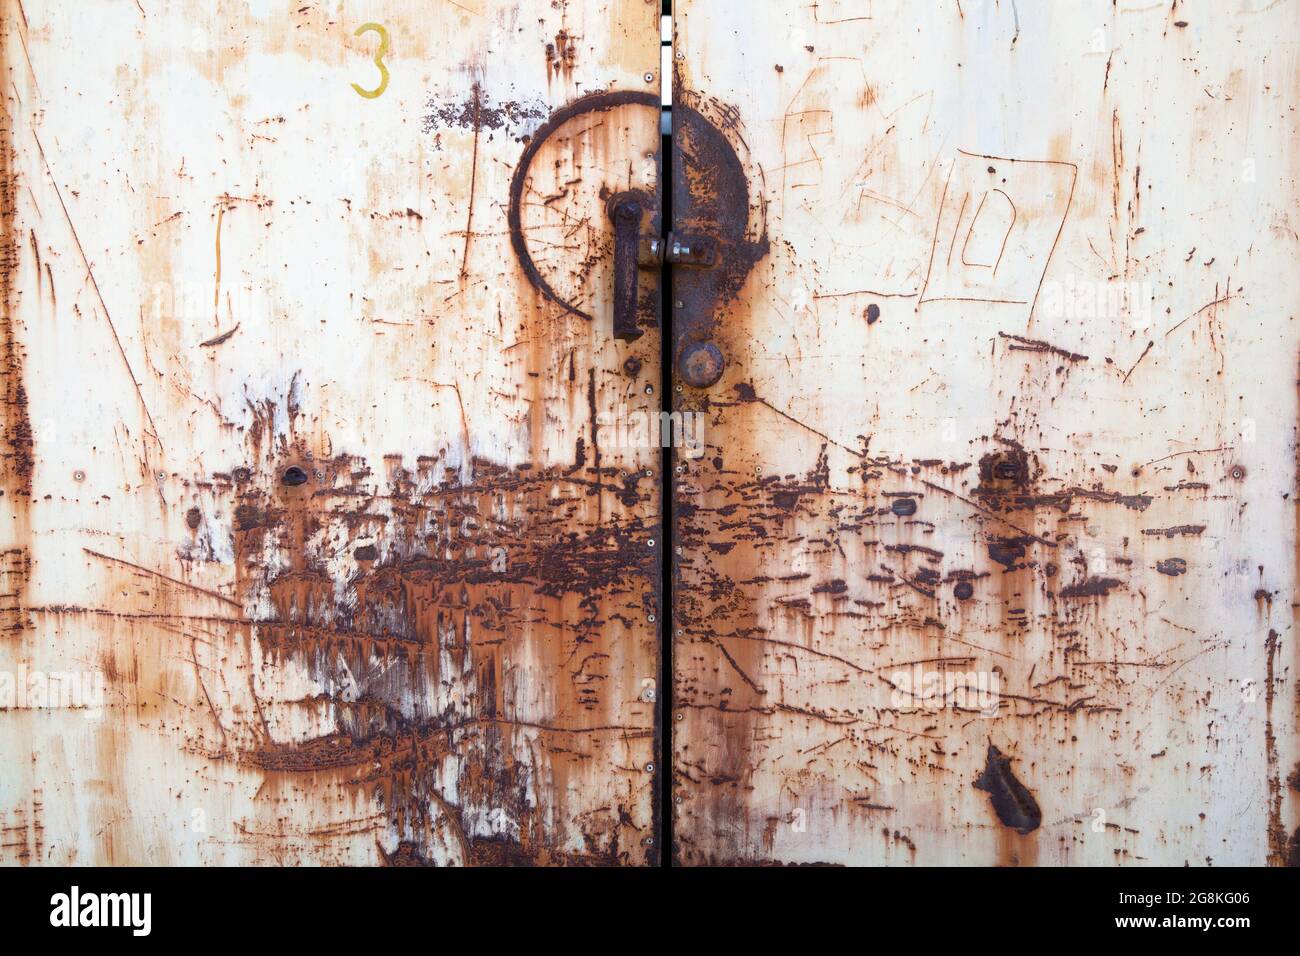 Old worn rusty metal. Scratches on rusty iron surface. Stock Photo